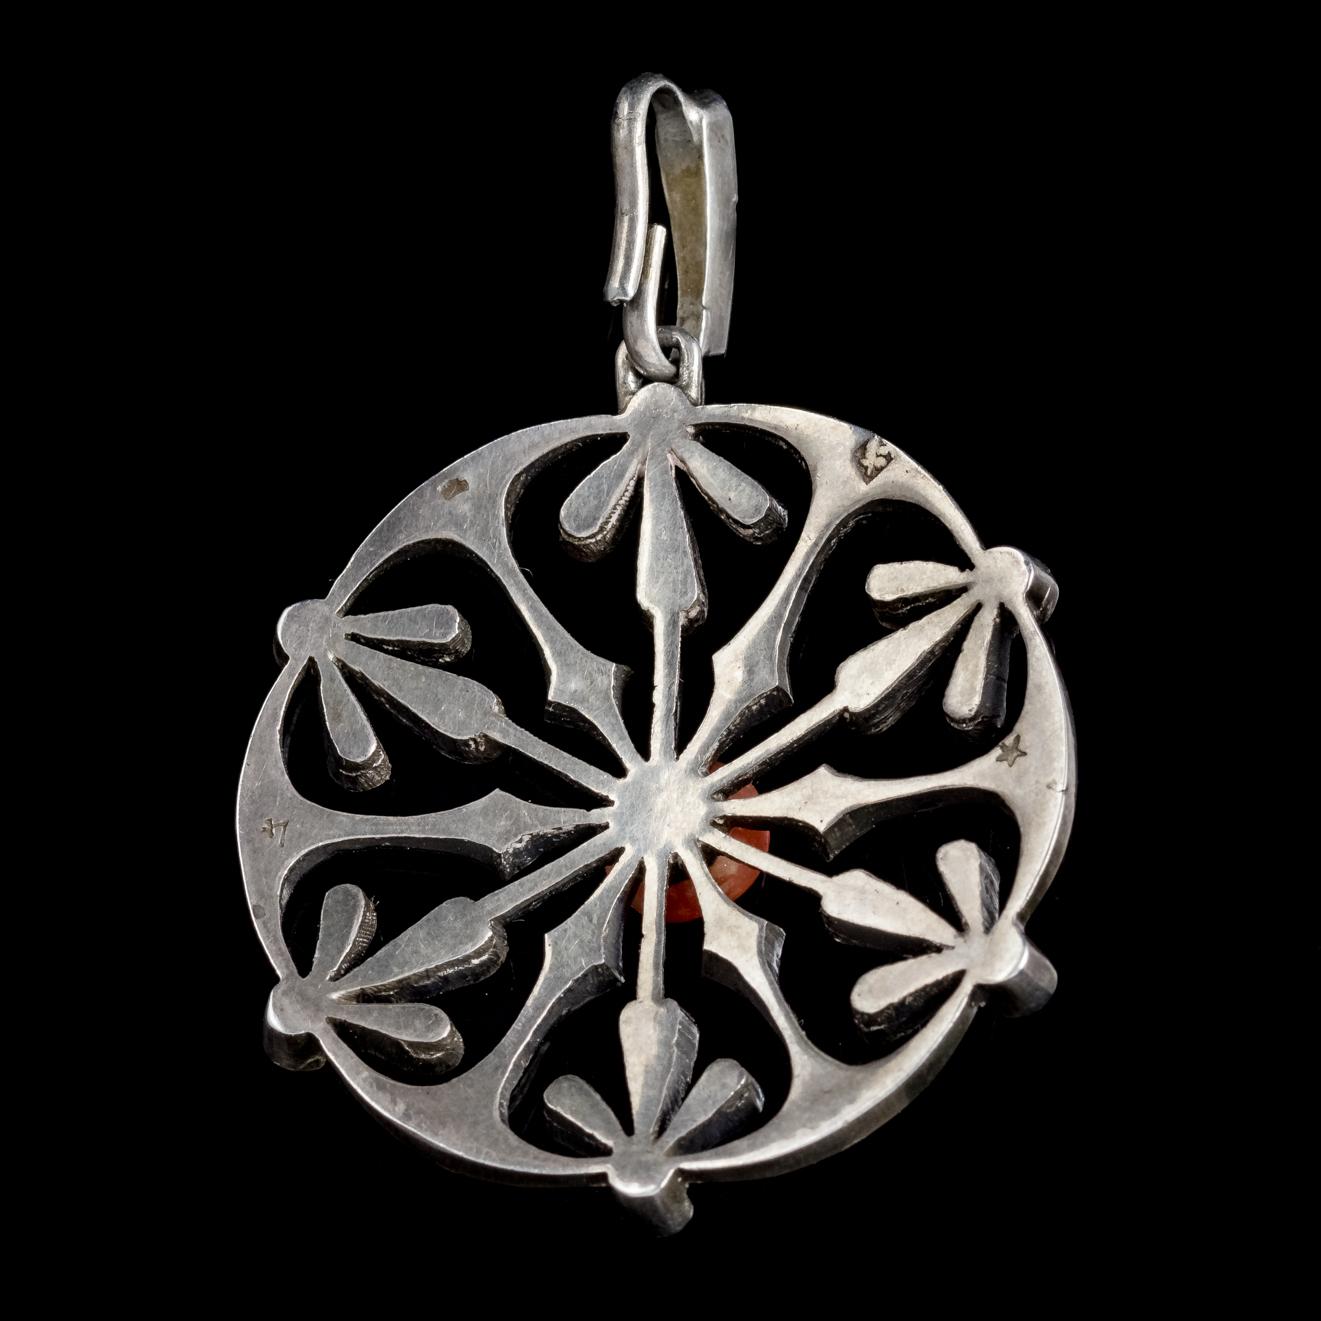 This delightful antique Victorian French snowflake pendant was made in the Art Nouveau style, Circa 1900. 

Art Nouveau was an international art style that was popular across Europe between 1890 and 1910. Art Nouveau jewellery drew it’s inspiration